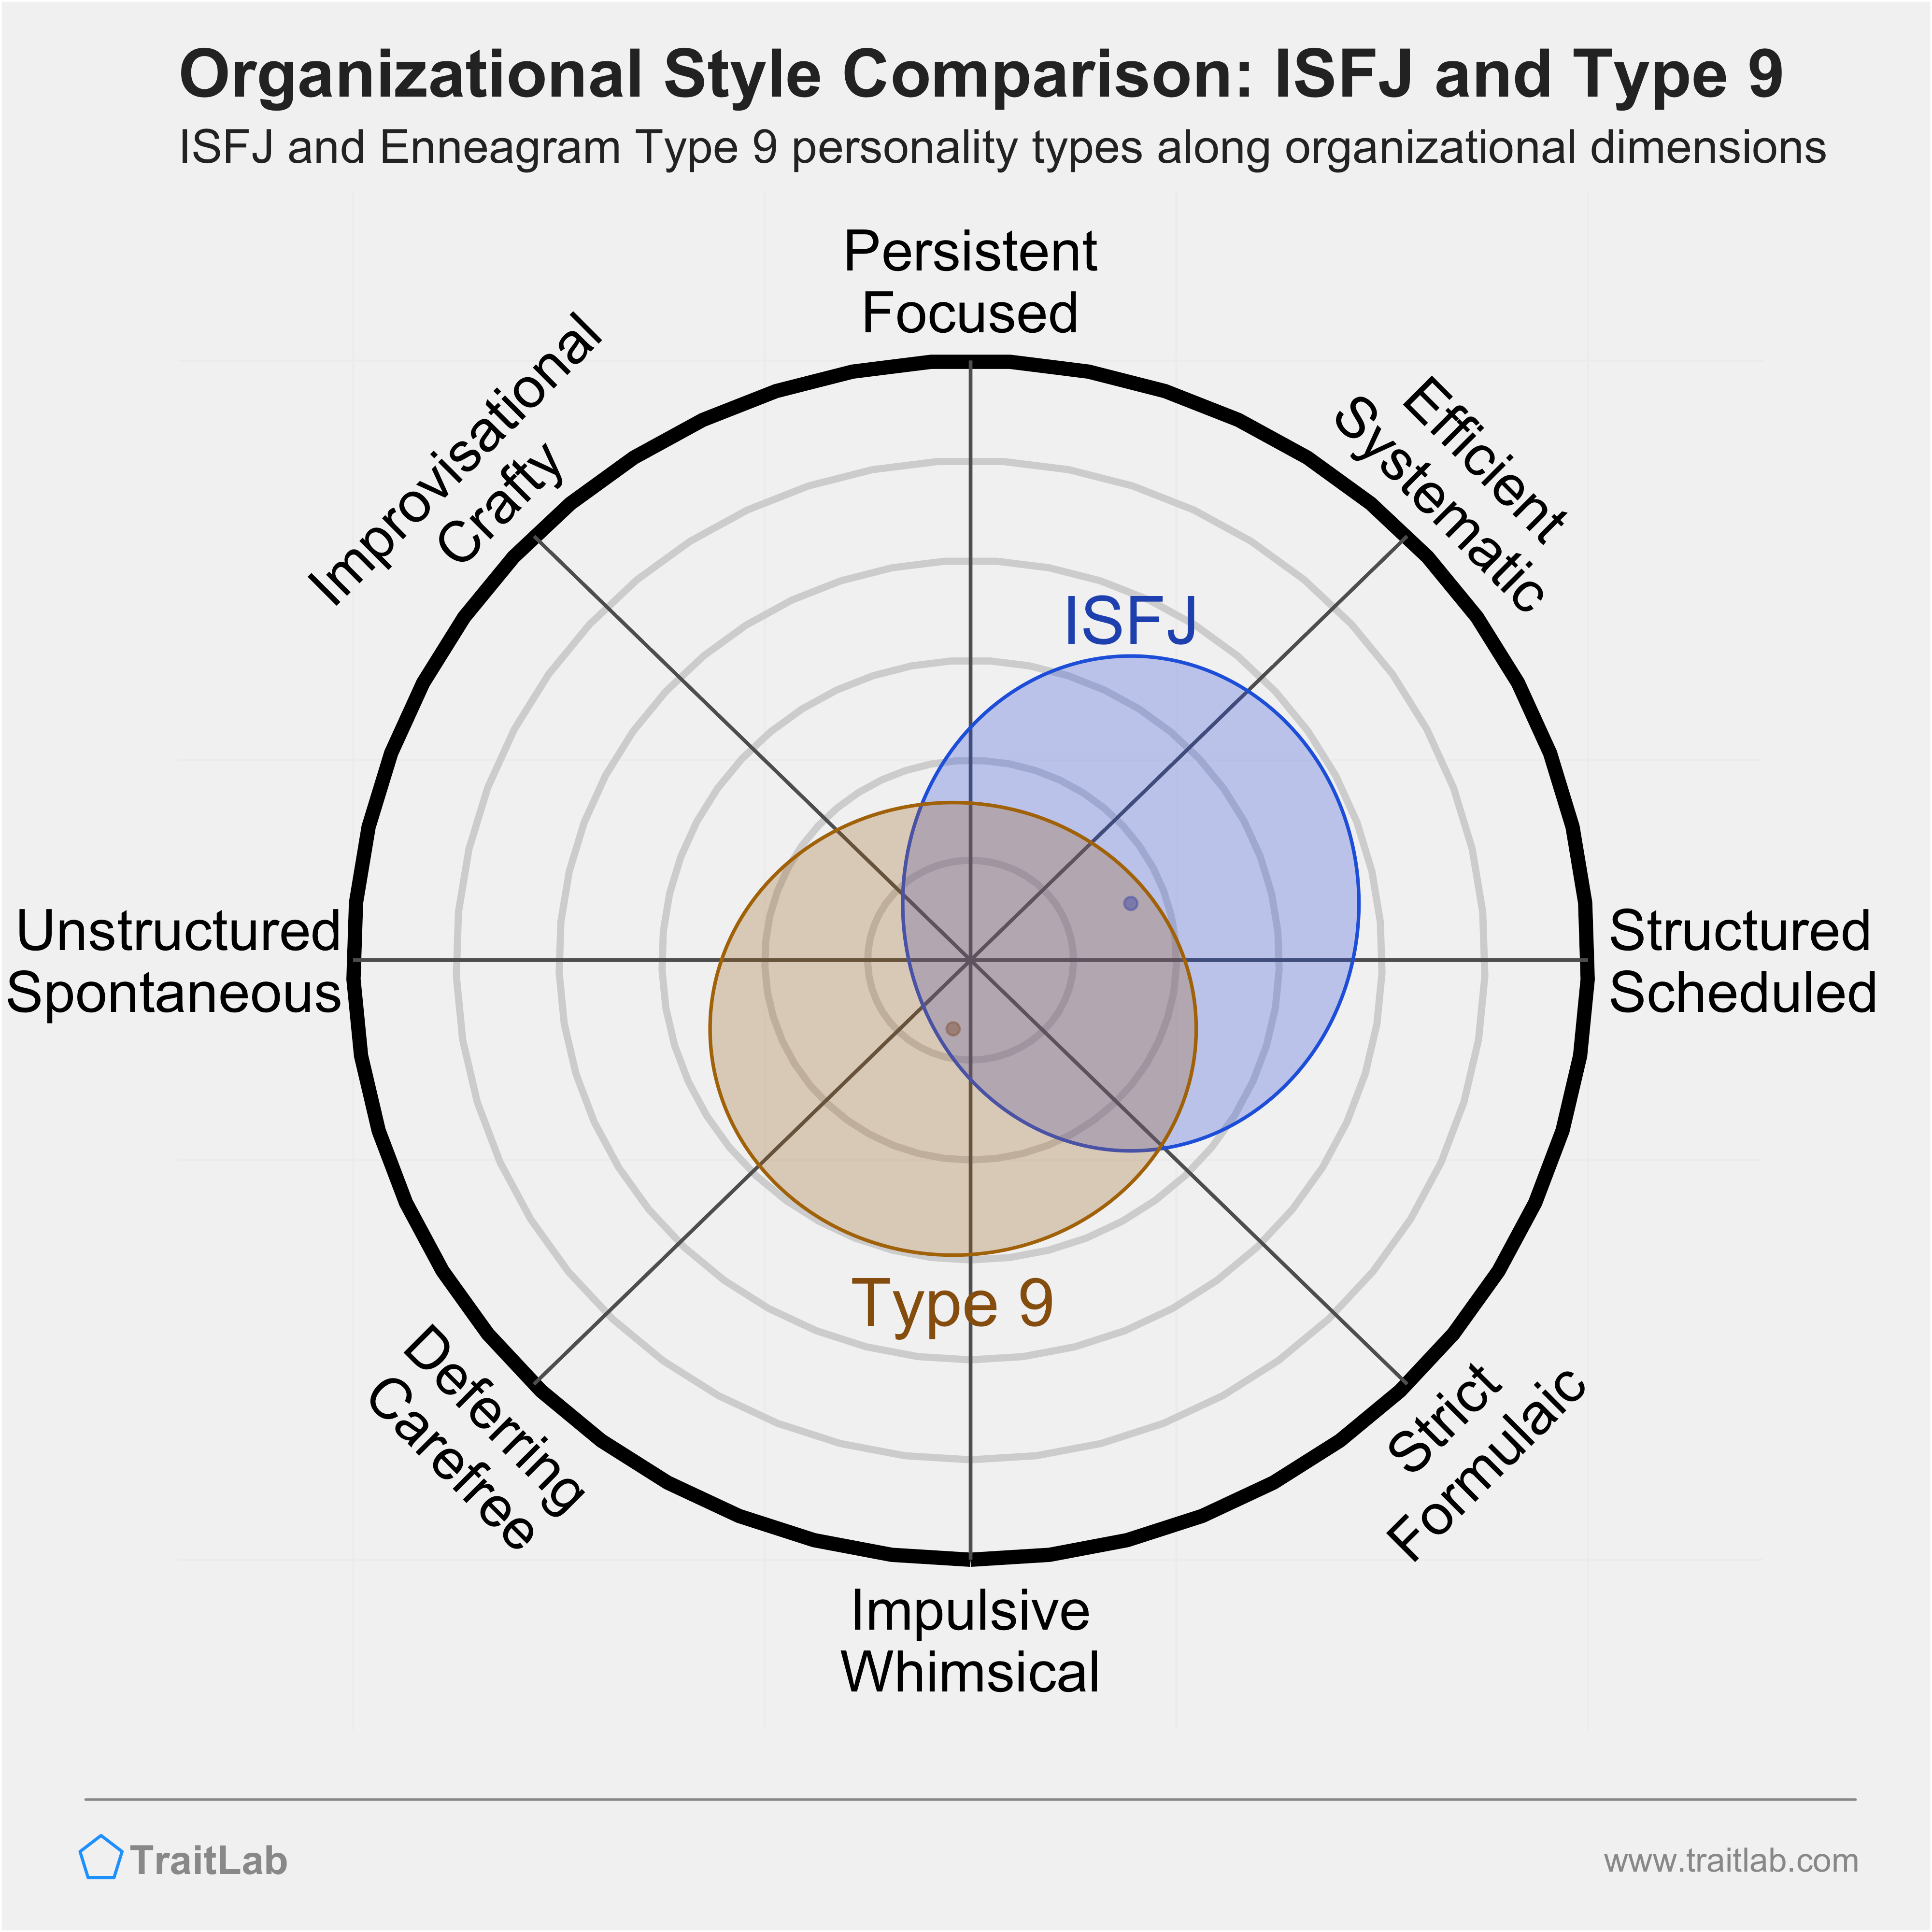 ISFJ and Type 9 comparison across organizational dimensions